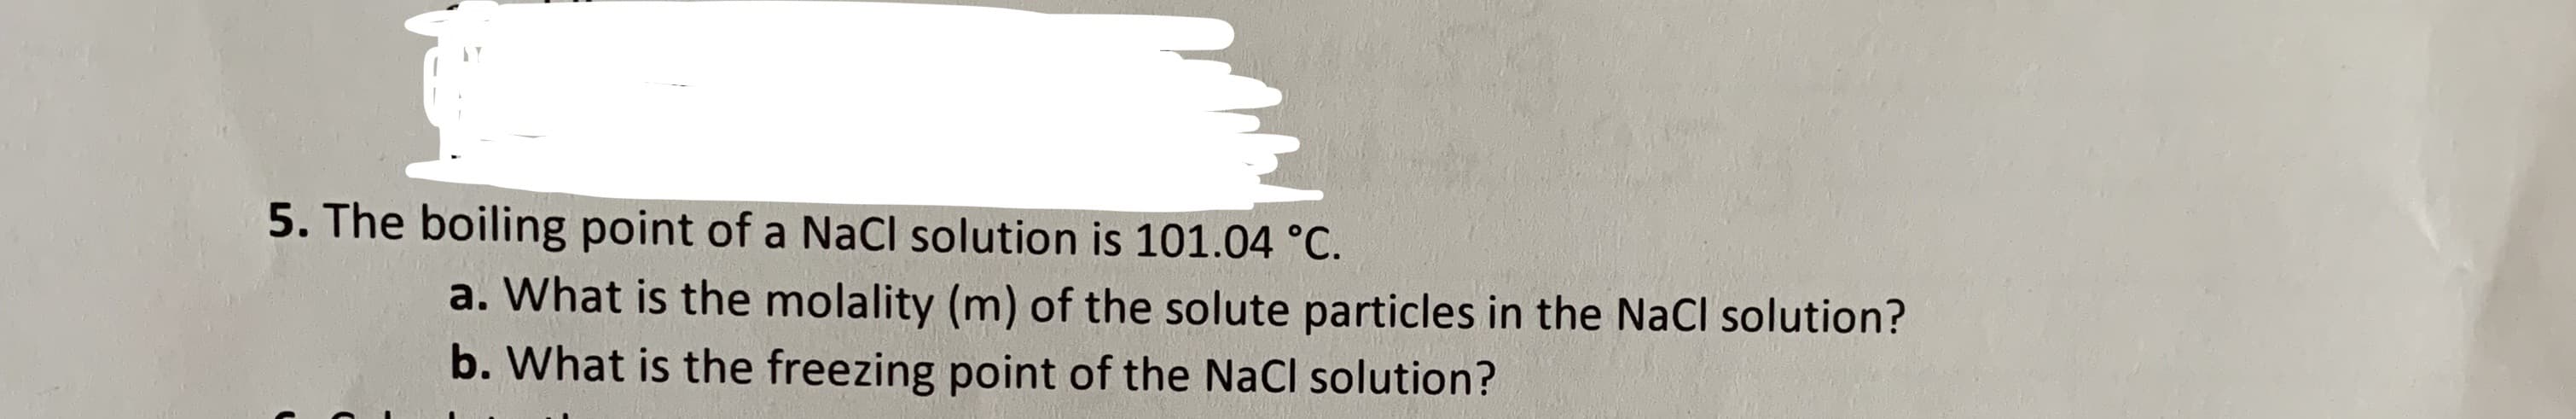 5. The boiling point of a NaCl solution is 101.04 °C.
a. What is the molality (m) of the solute particles in the NaCl solution?
b. What is the freezing point of the NaCl solution?
